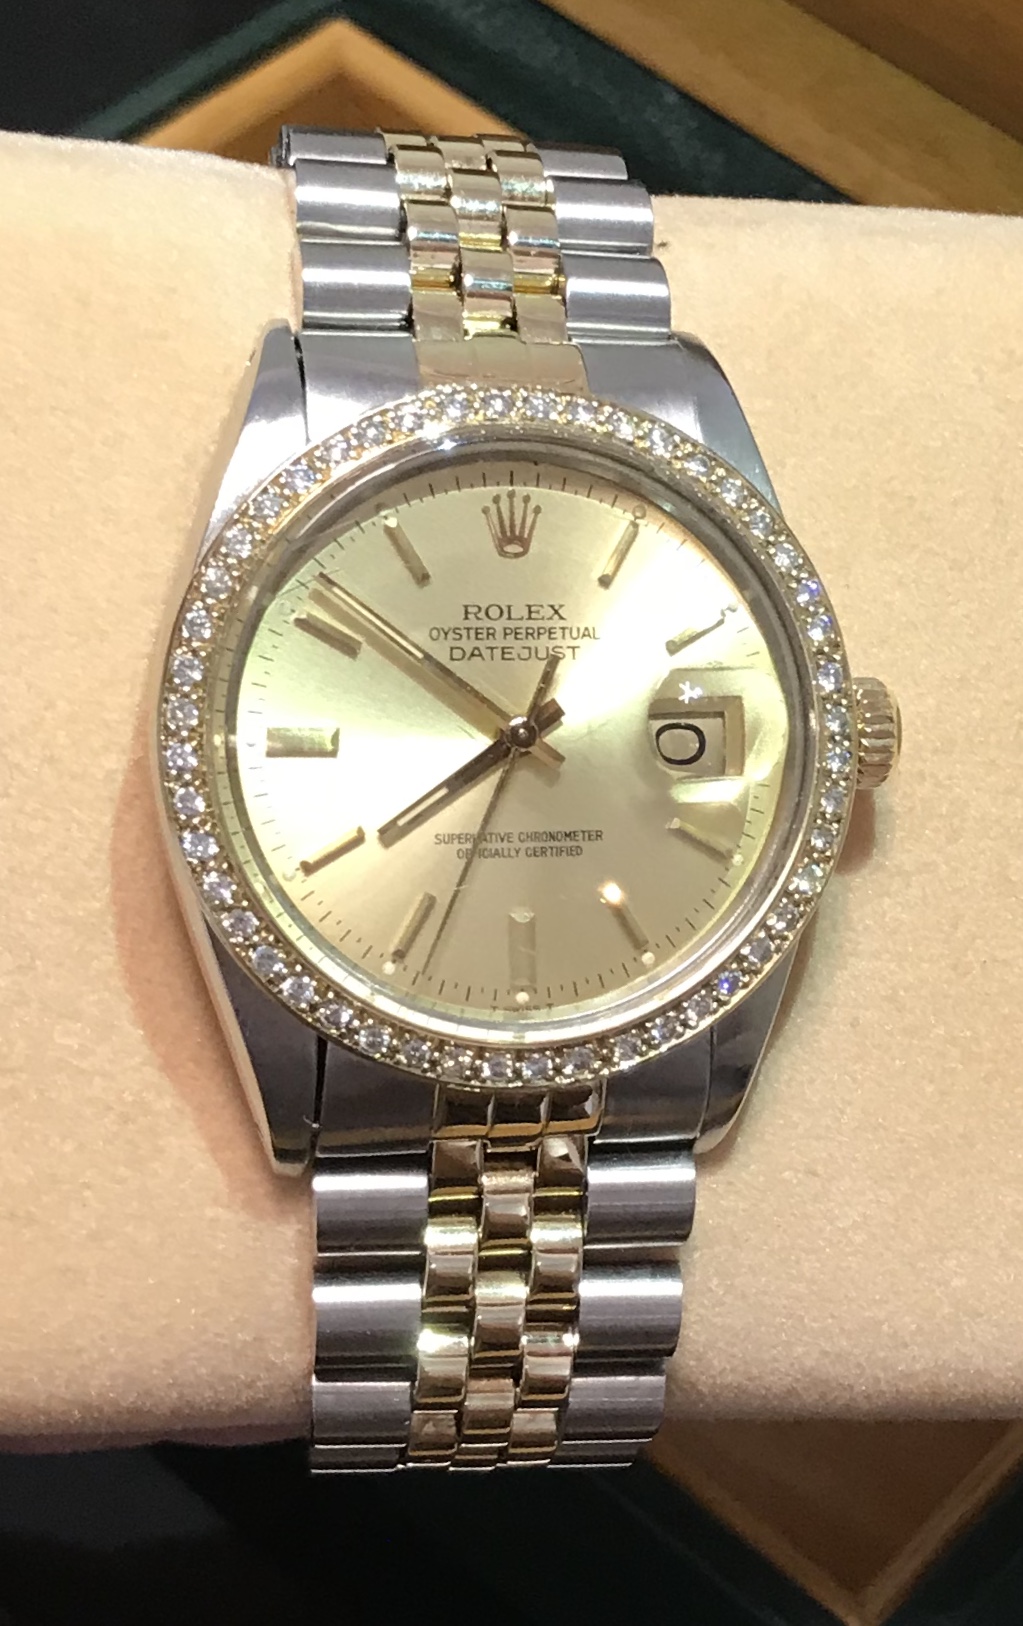 Gents Rolex Datejust 16013 18k Gold & Stainless Steel & Diamond - Image 2 of 8